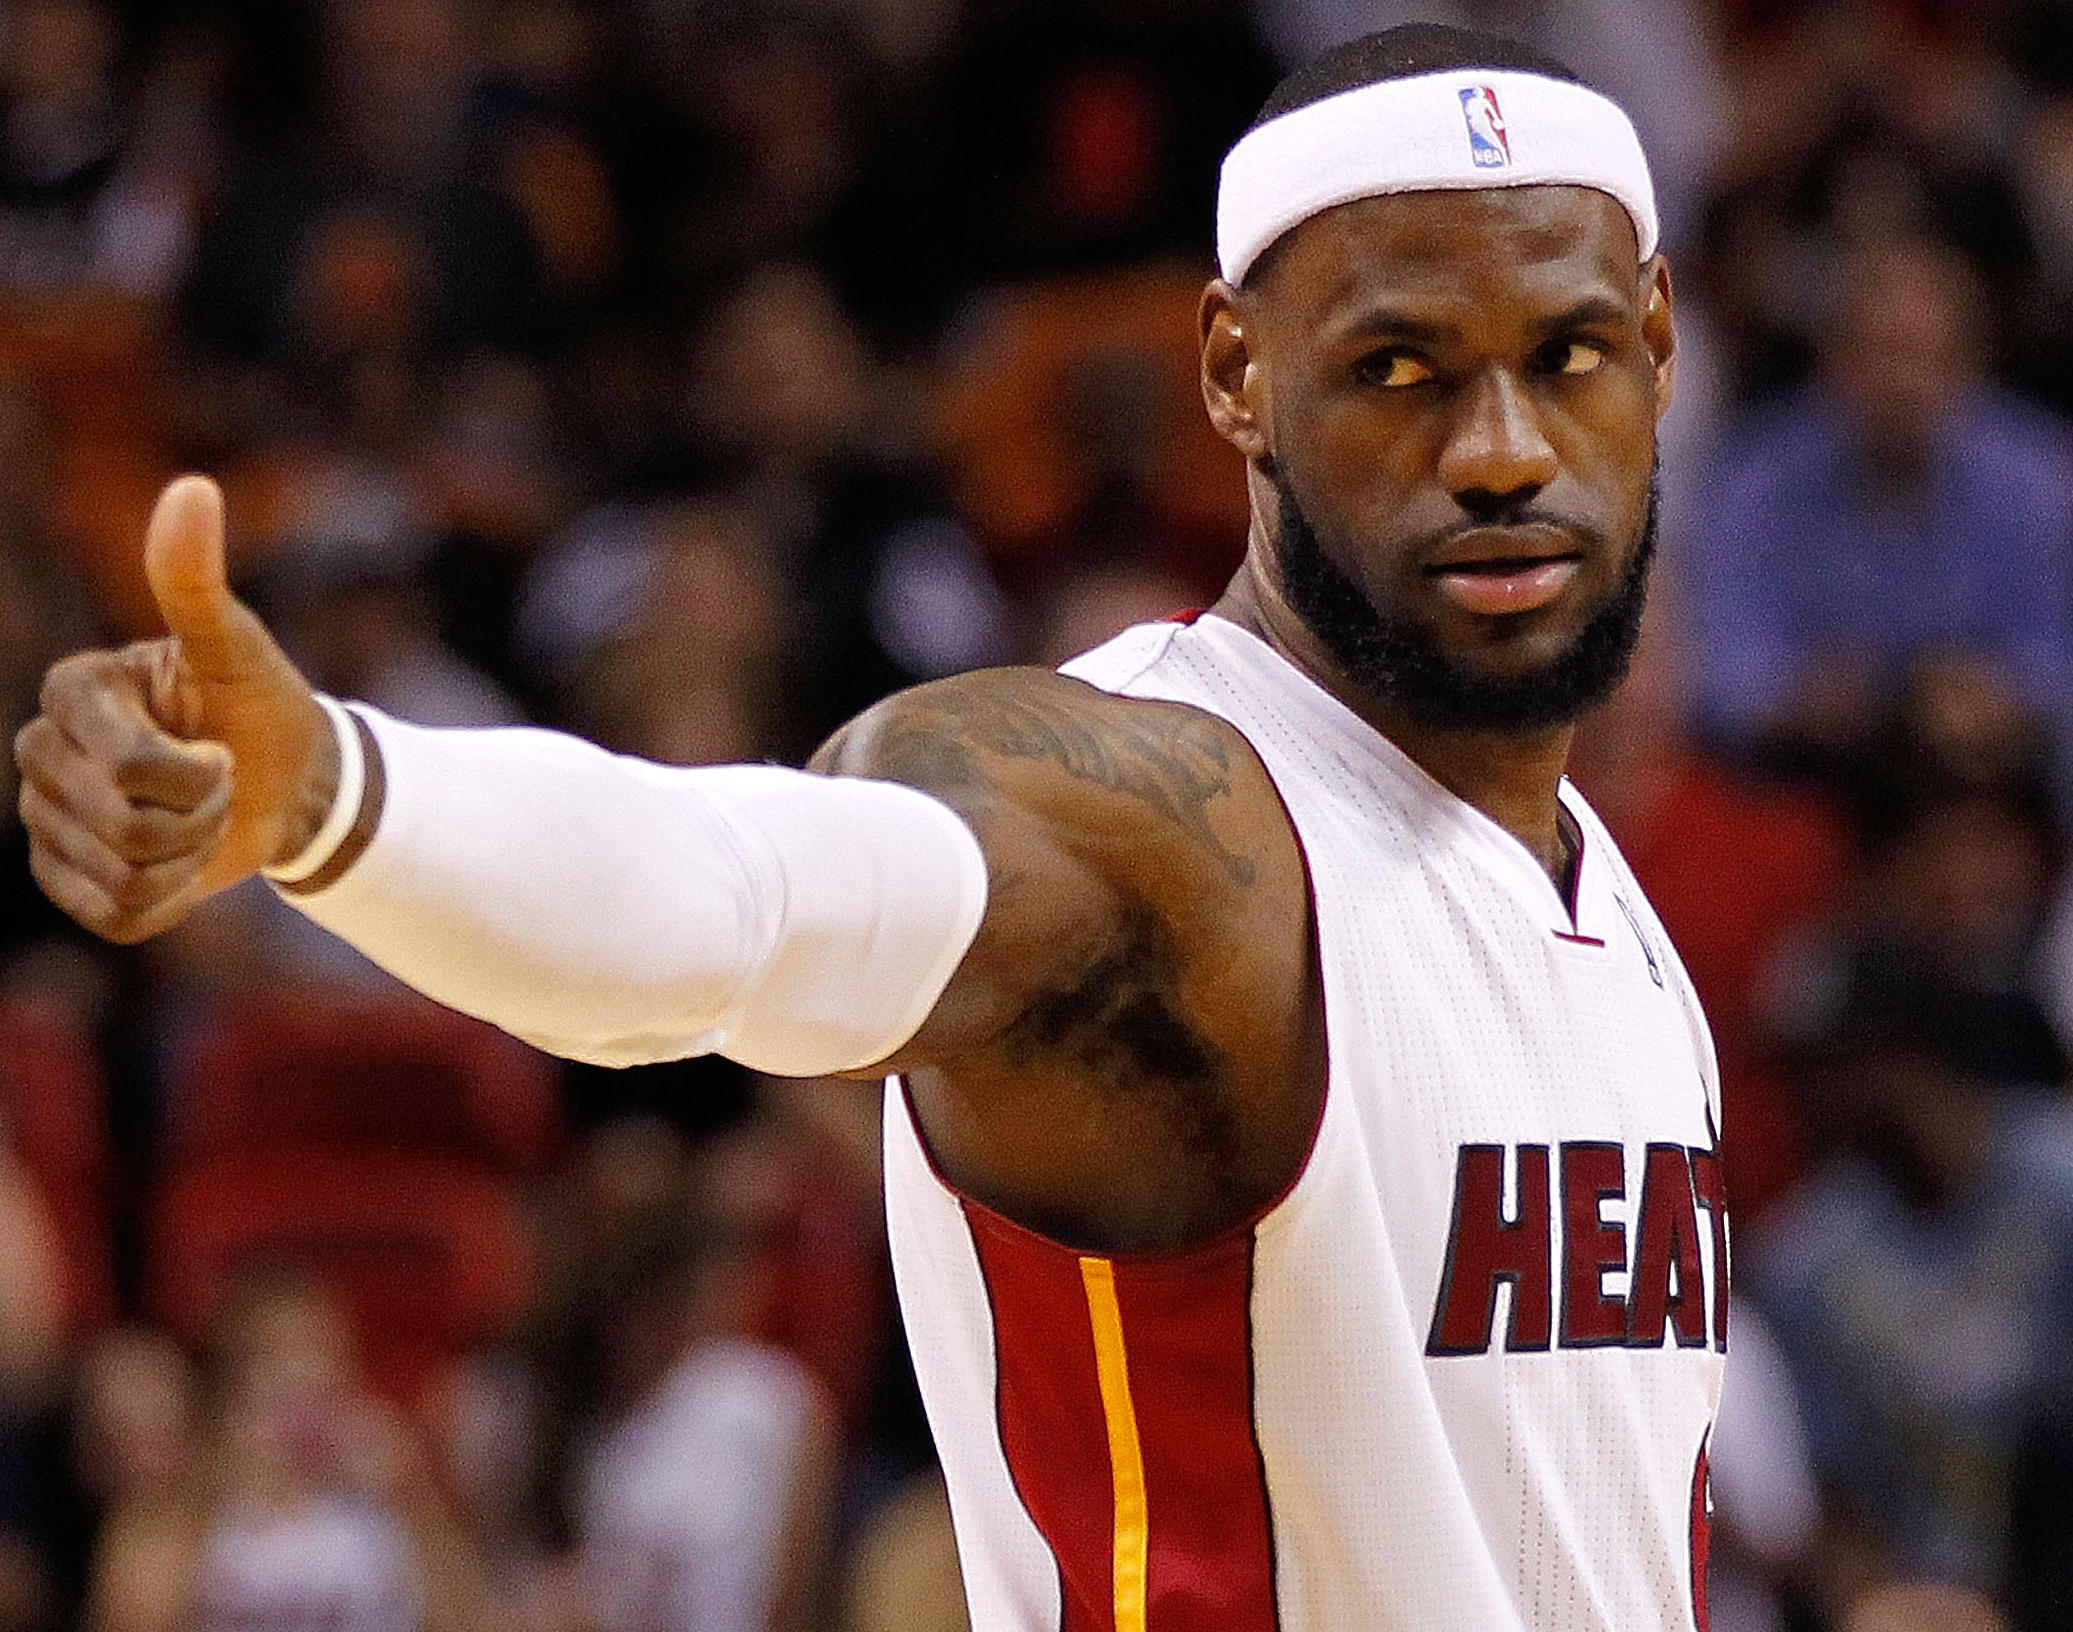 http://www.totalprosports.com/wp-content/uploads/2013/03/lebron-james-thumbs-up-miami.jpg